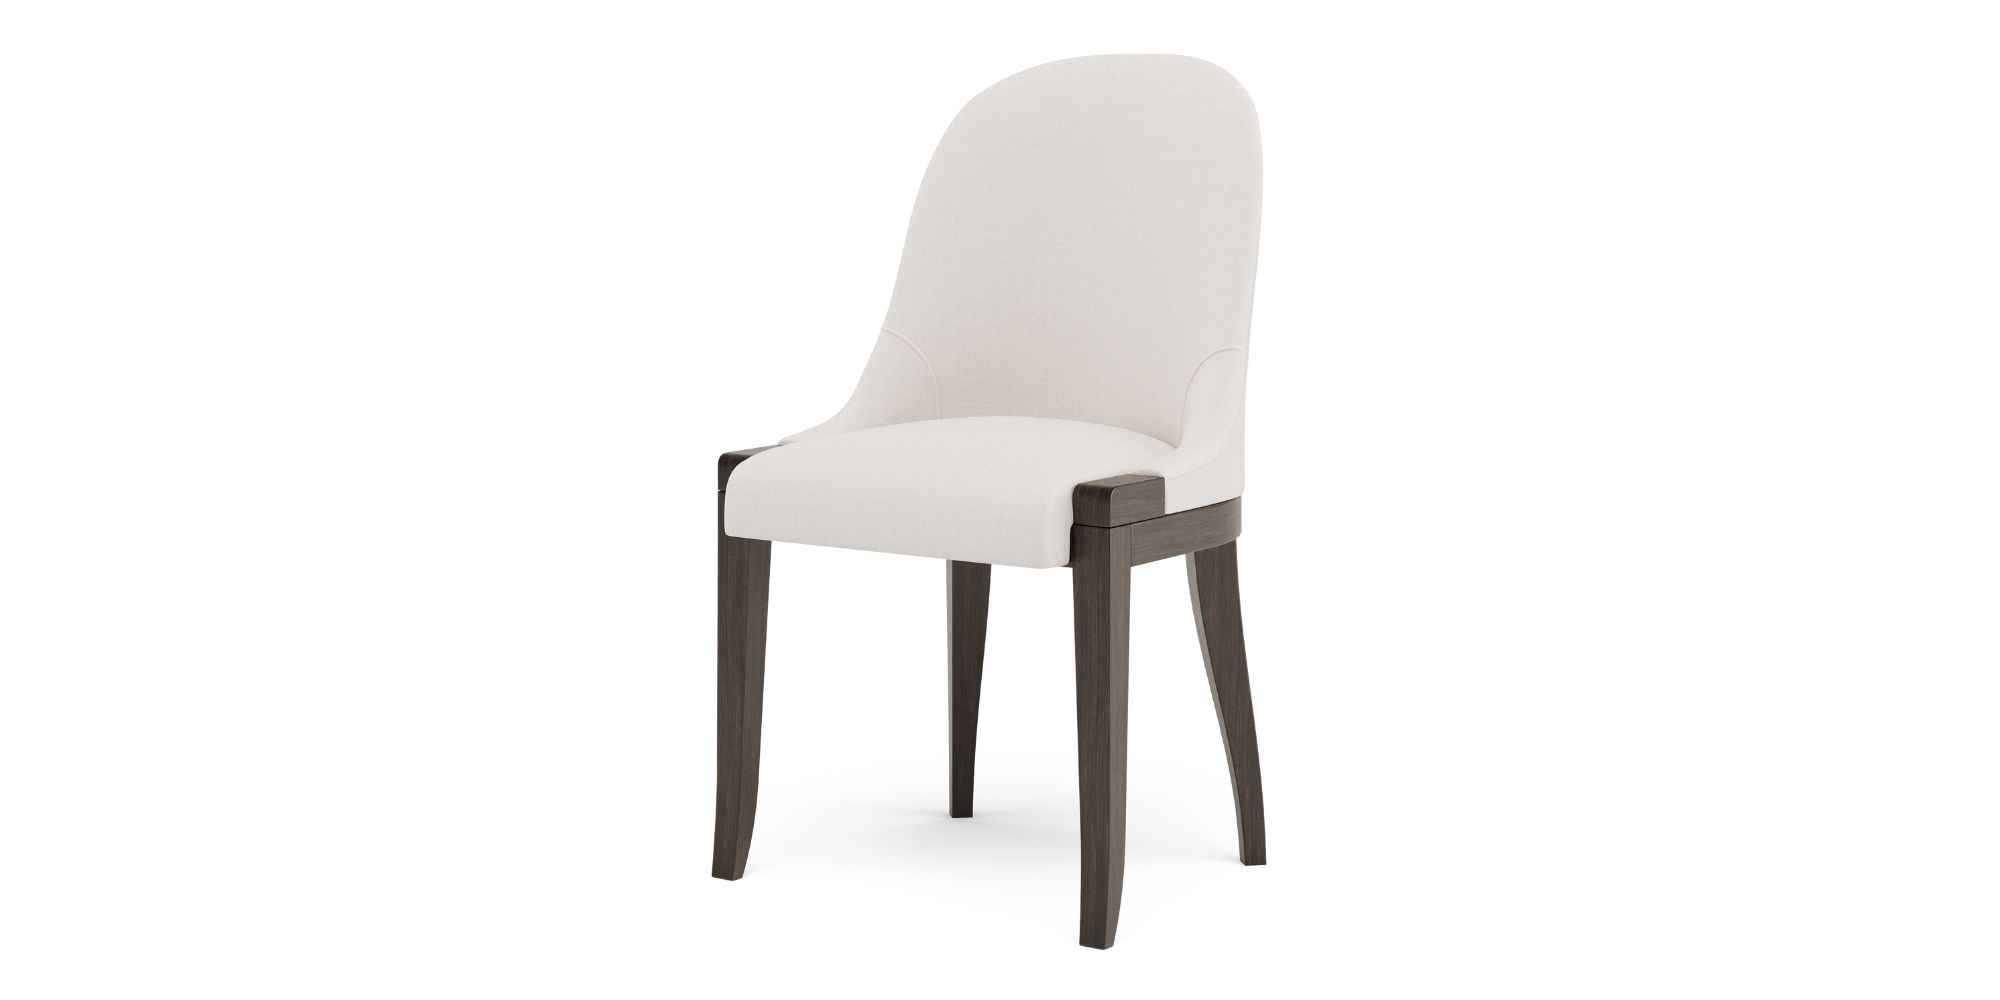 Largo Dining Chair – Upholstered Back in Outdoor Dining Chairs for Largo collection